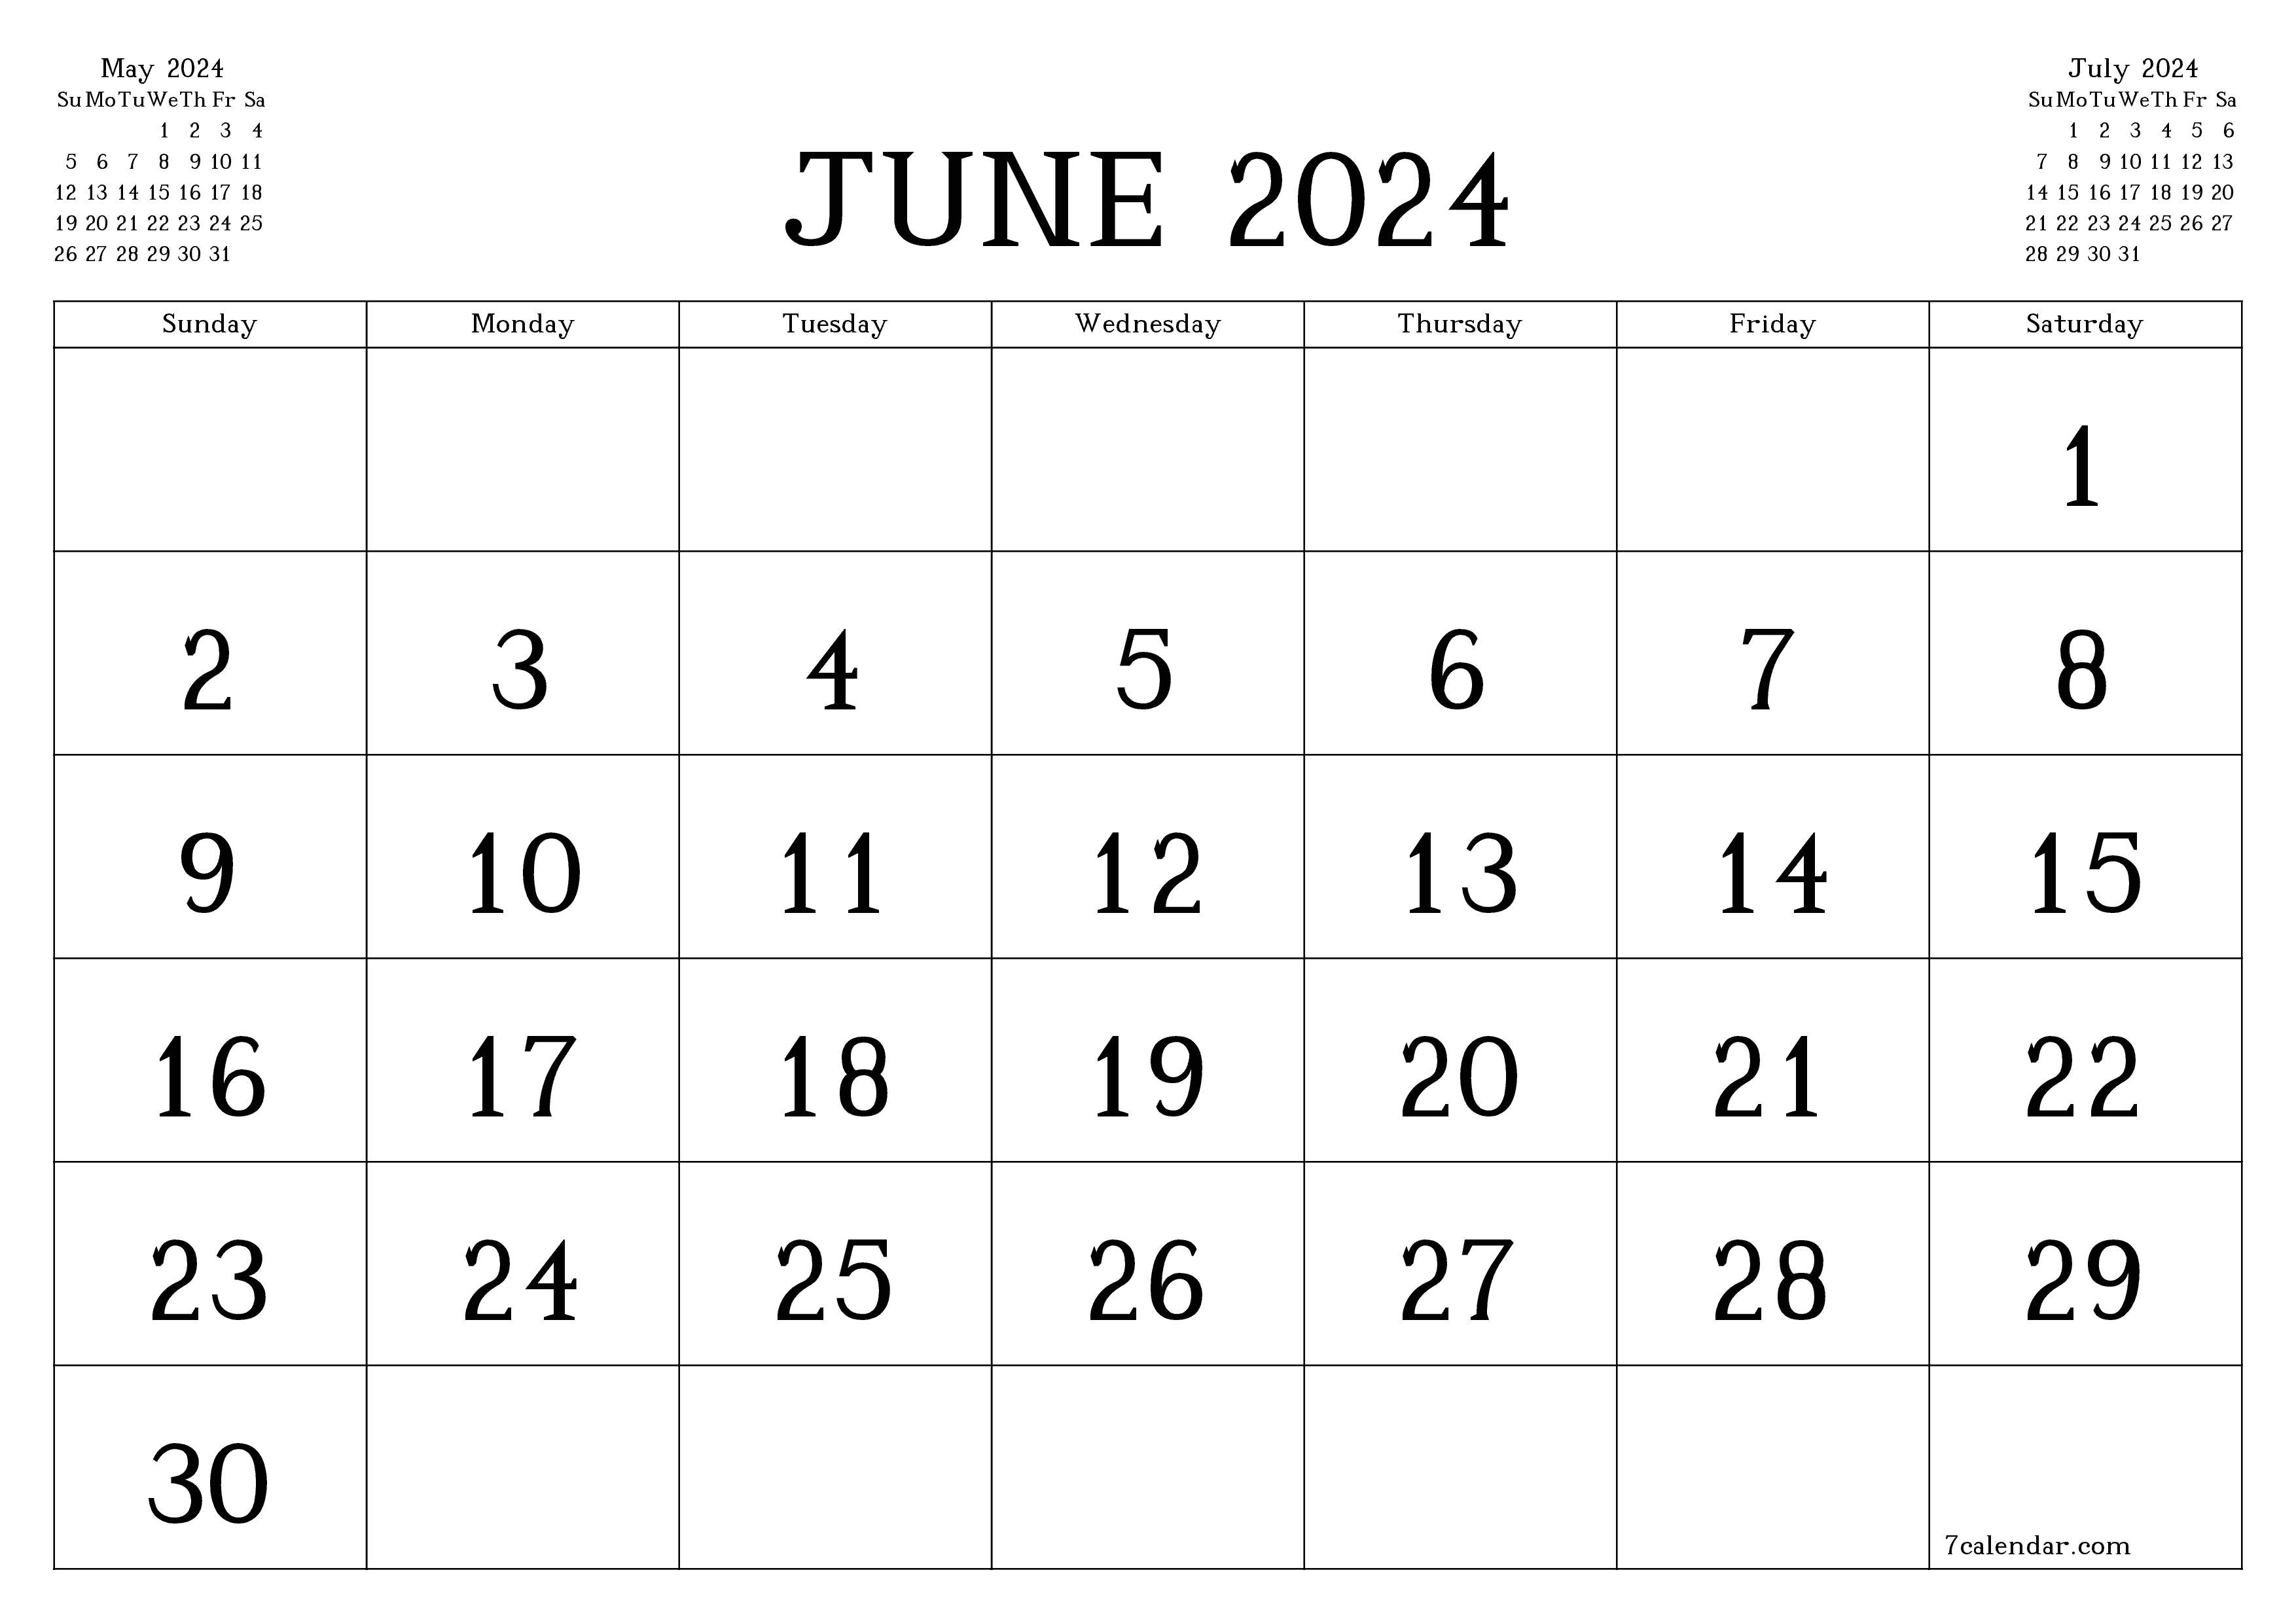 June 2024 Free Printable Calendars And Planners, Pdf Templates for Printable Calendar 2024 June July August